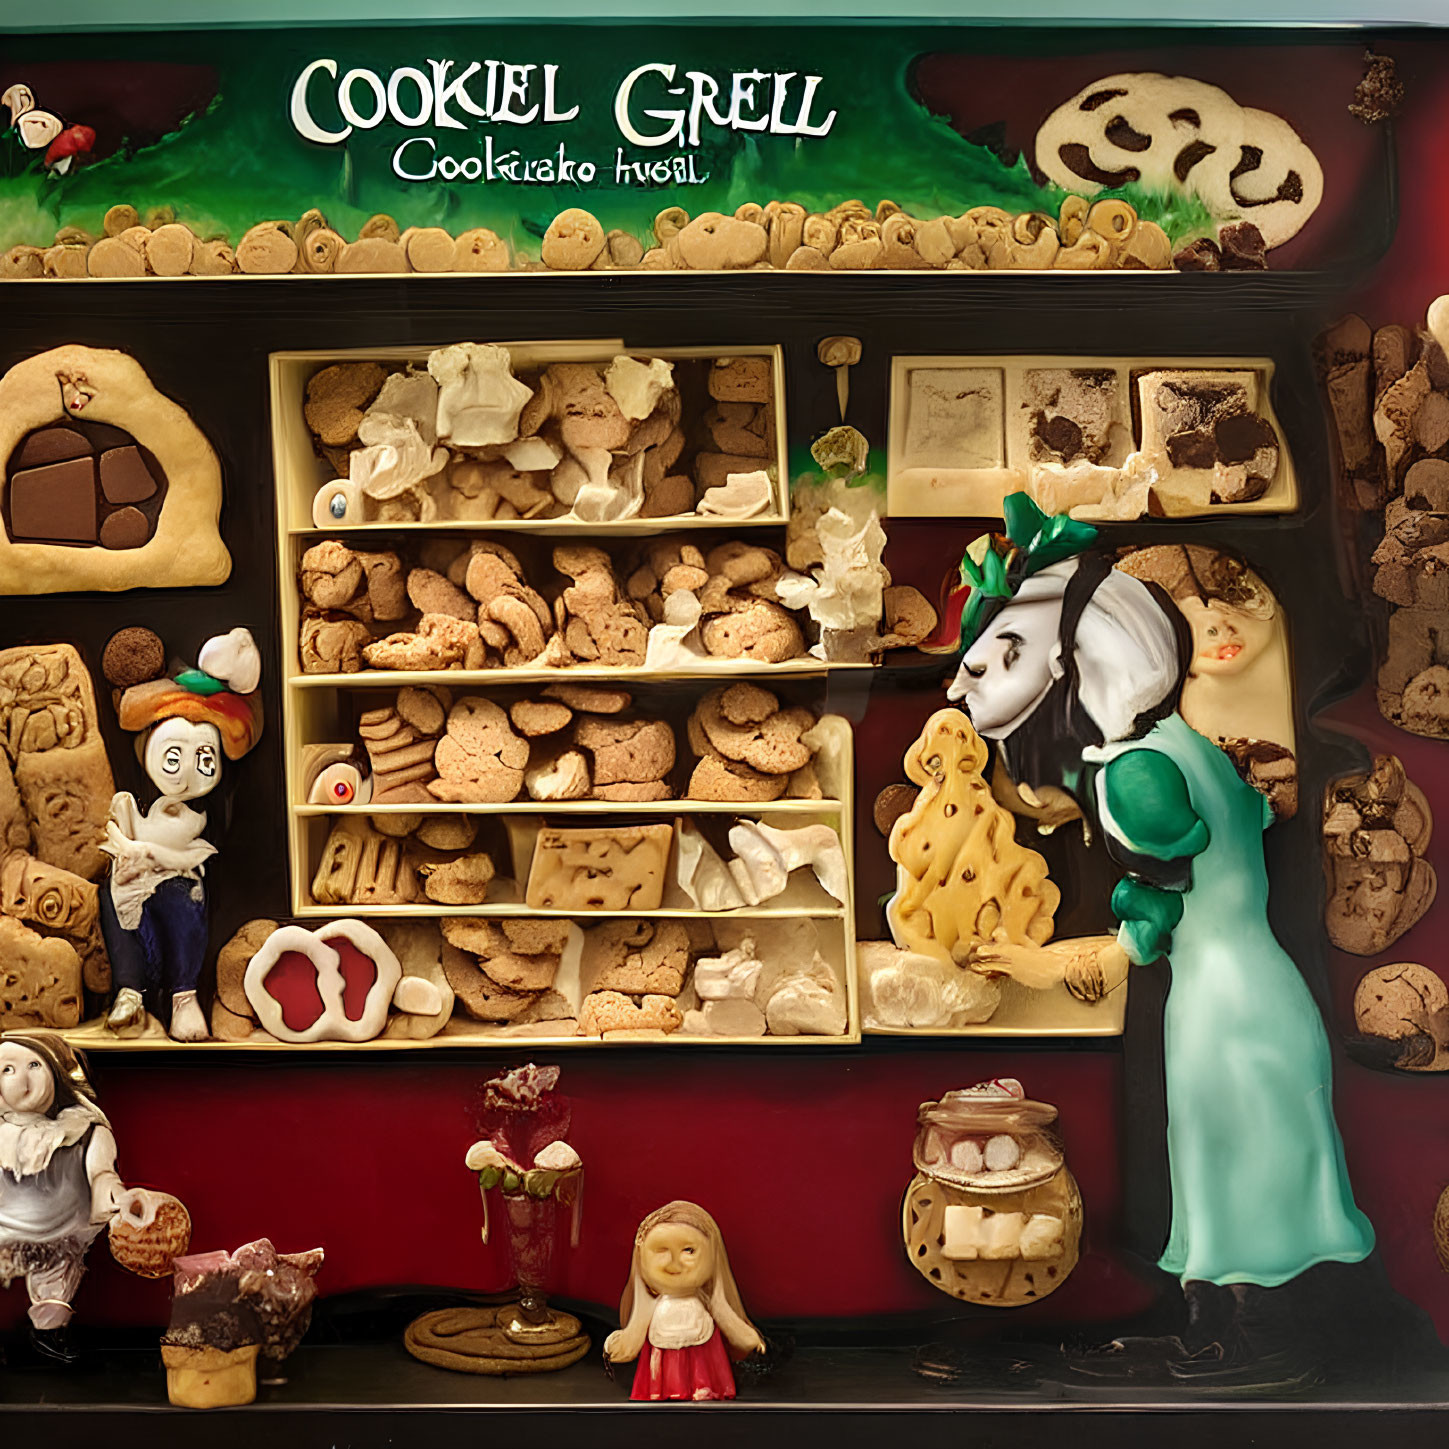 Whimsical Cookie Display with Animated Figures and 'Cookie Grill' Title